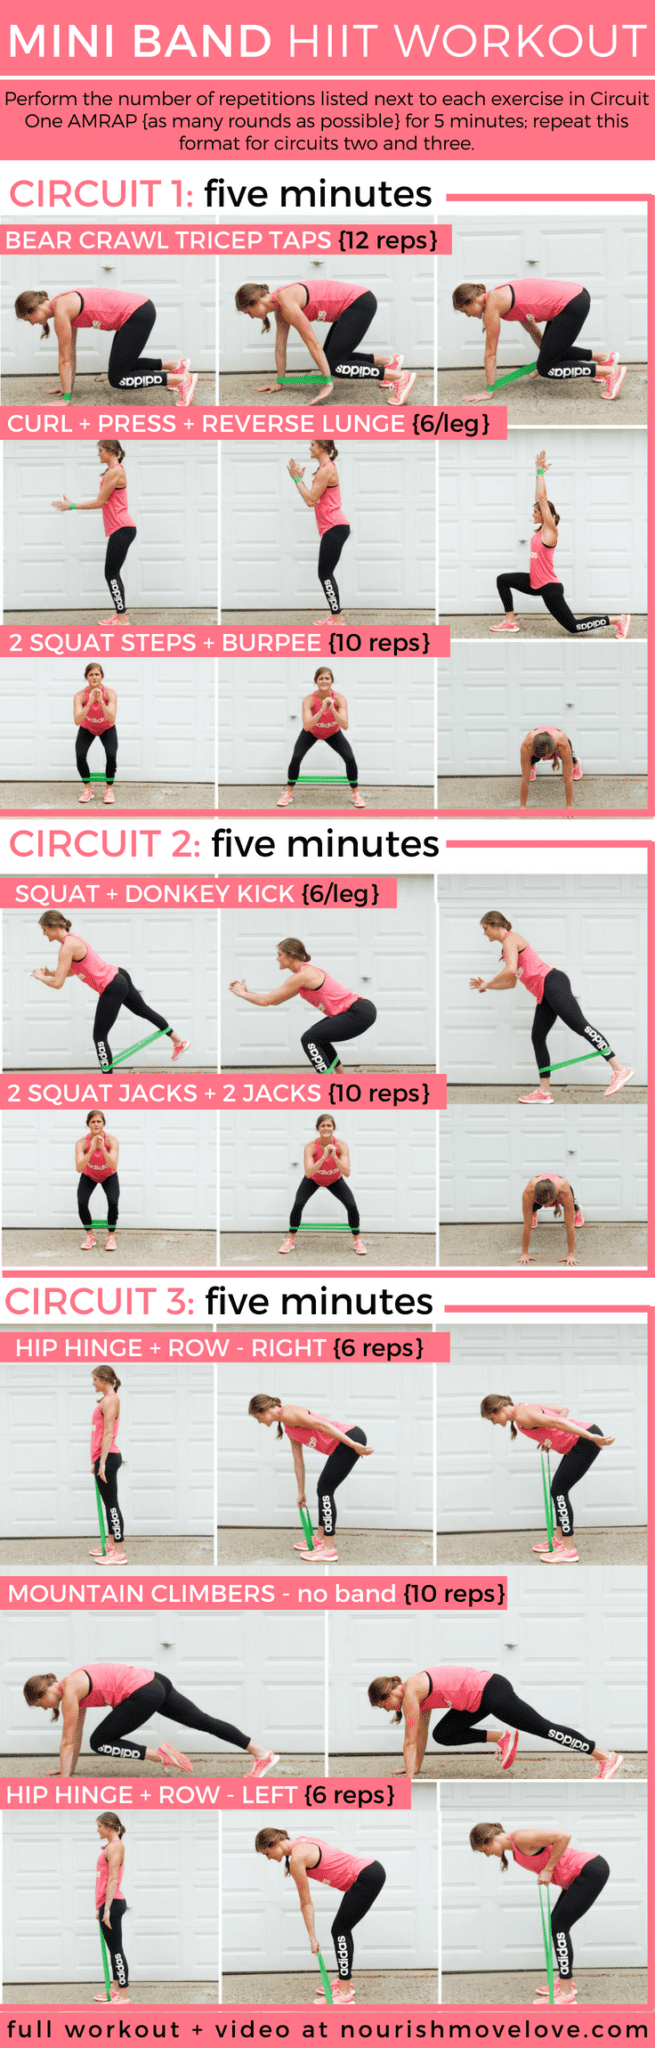 44 15 Minute 15 minute hiit leg workout for Six Pack